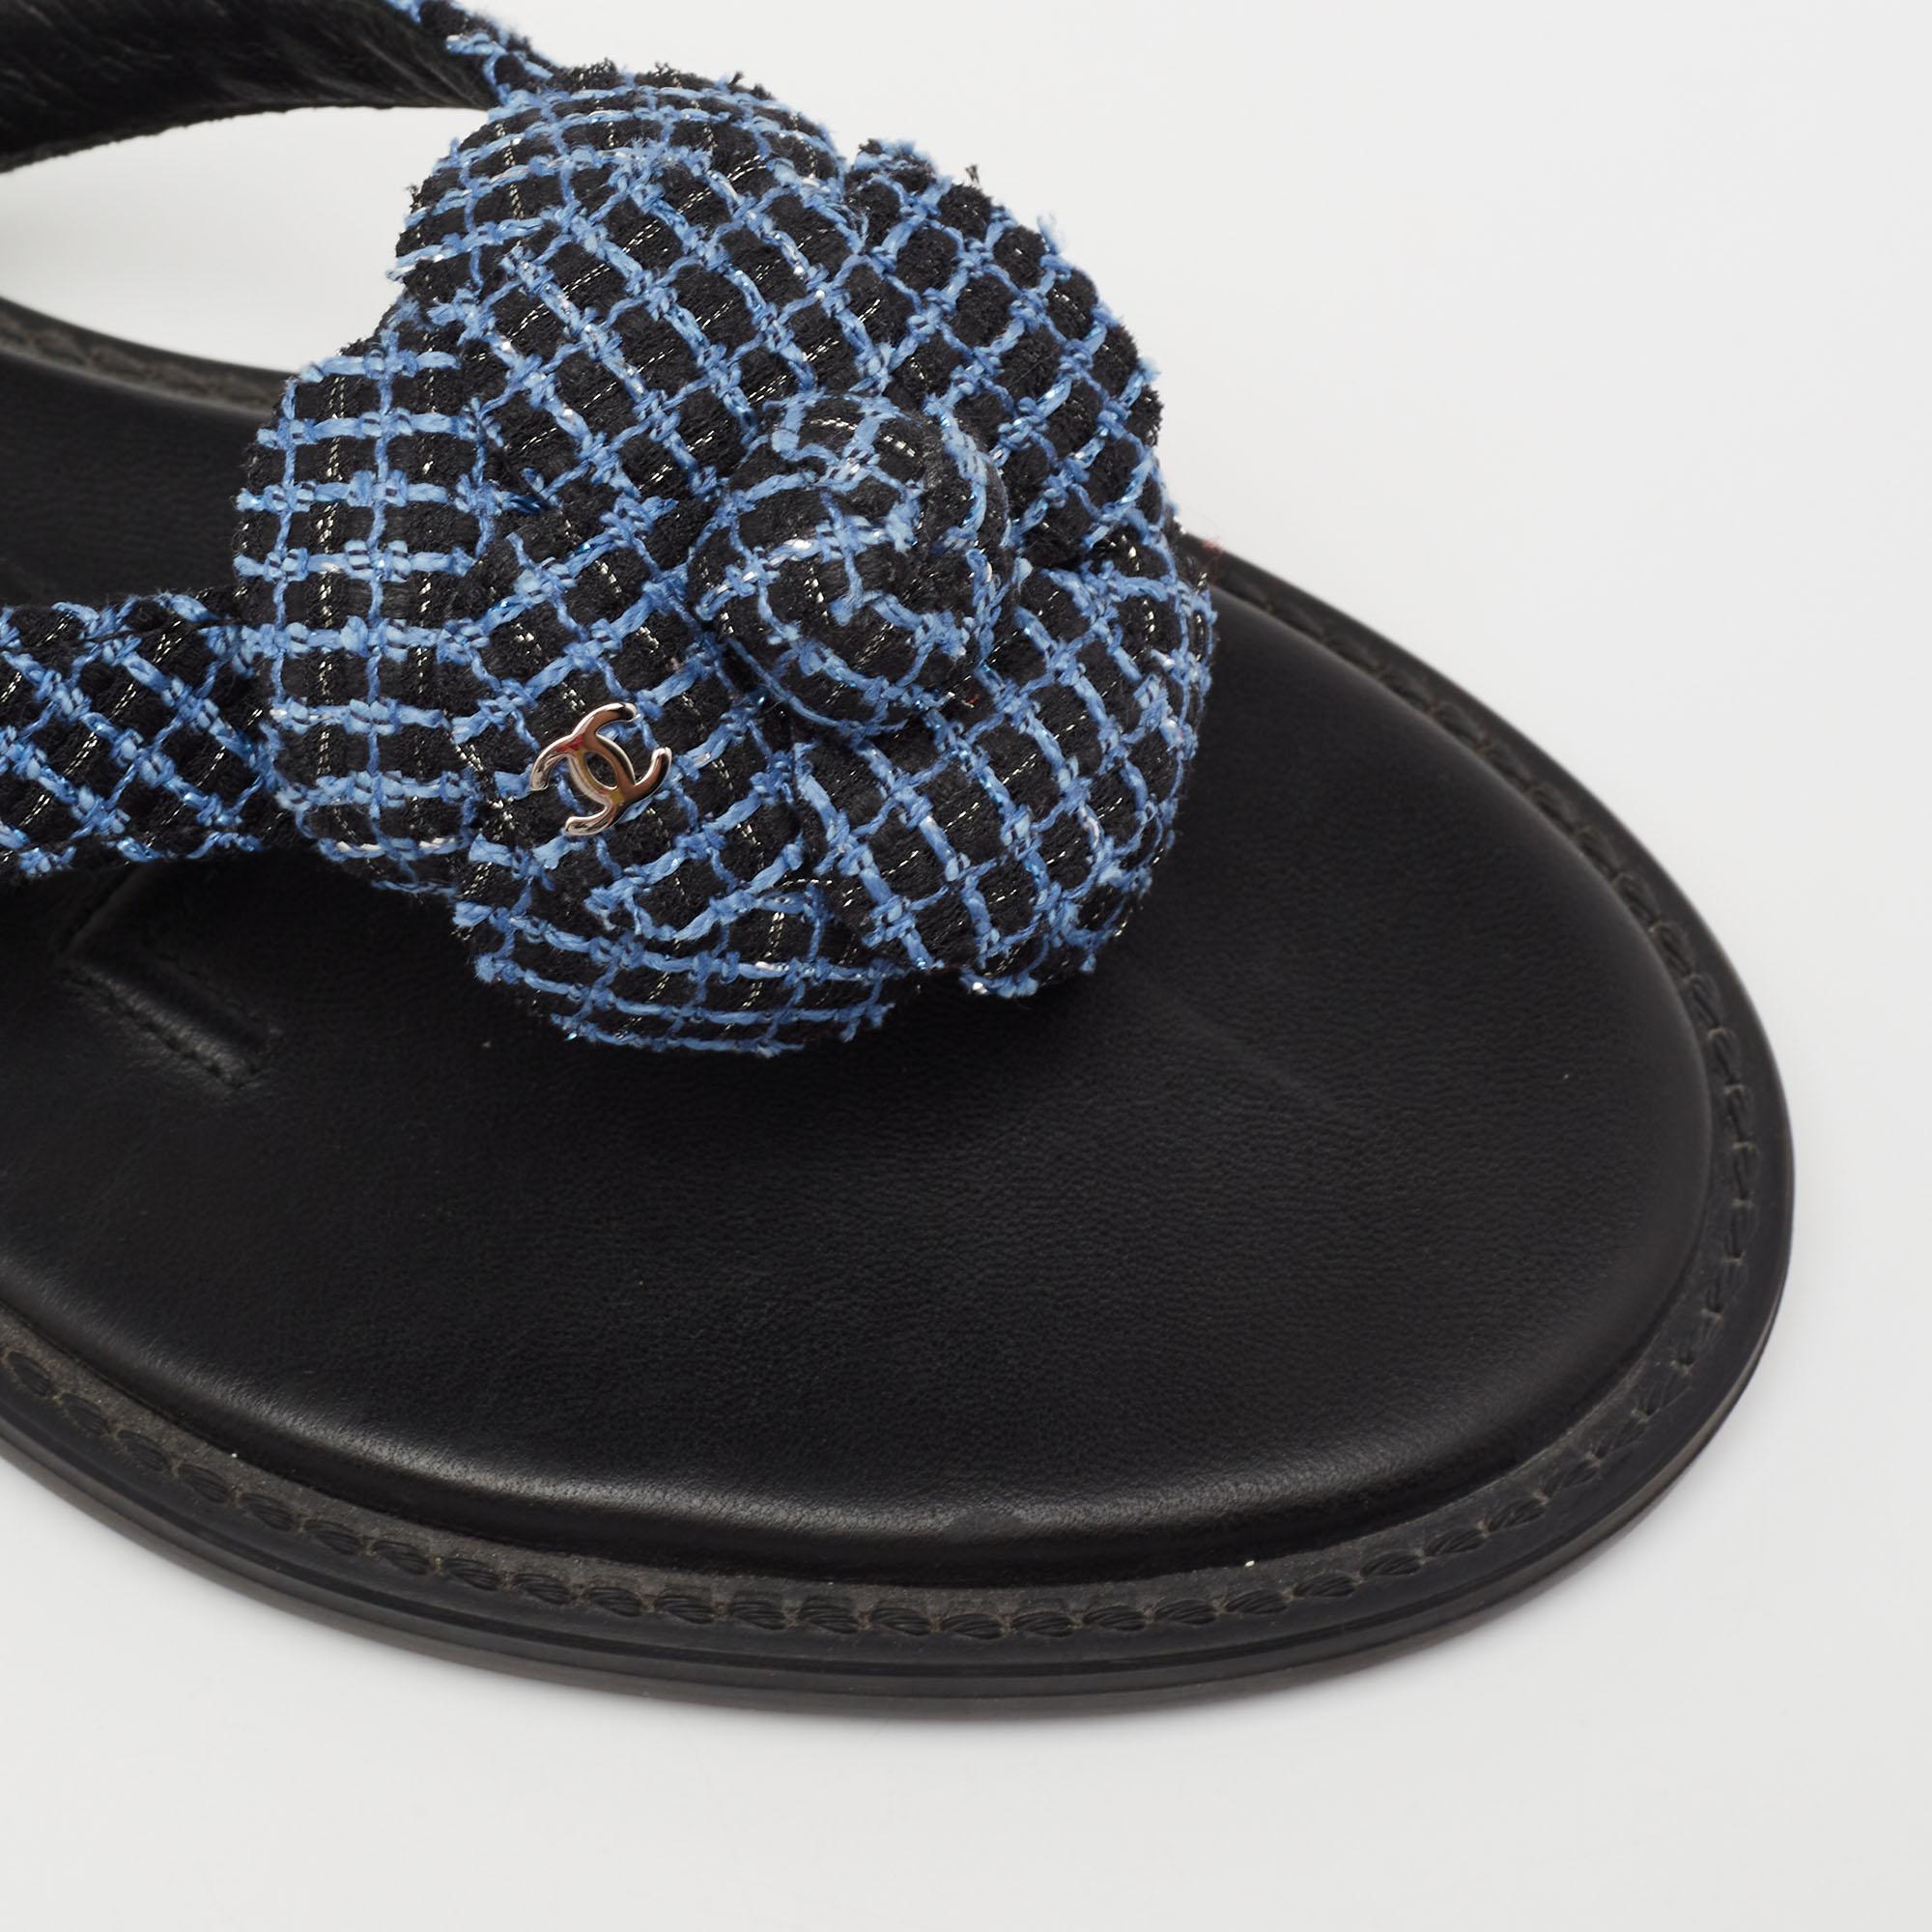 Chanel Blue Tweed Camellia Thong Flat Sandals Size 37.5 1